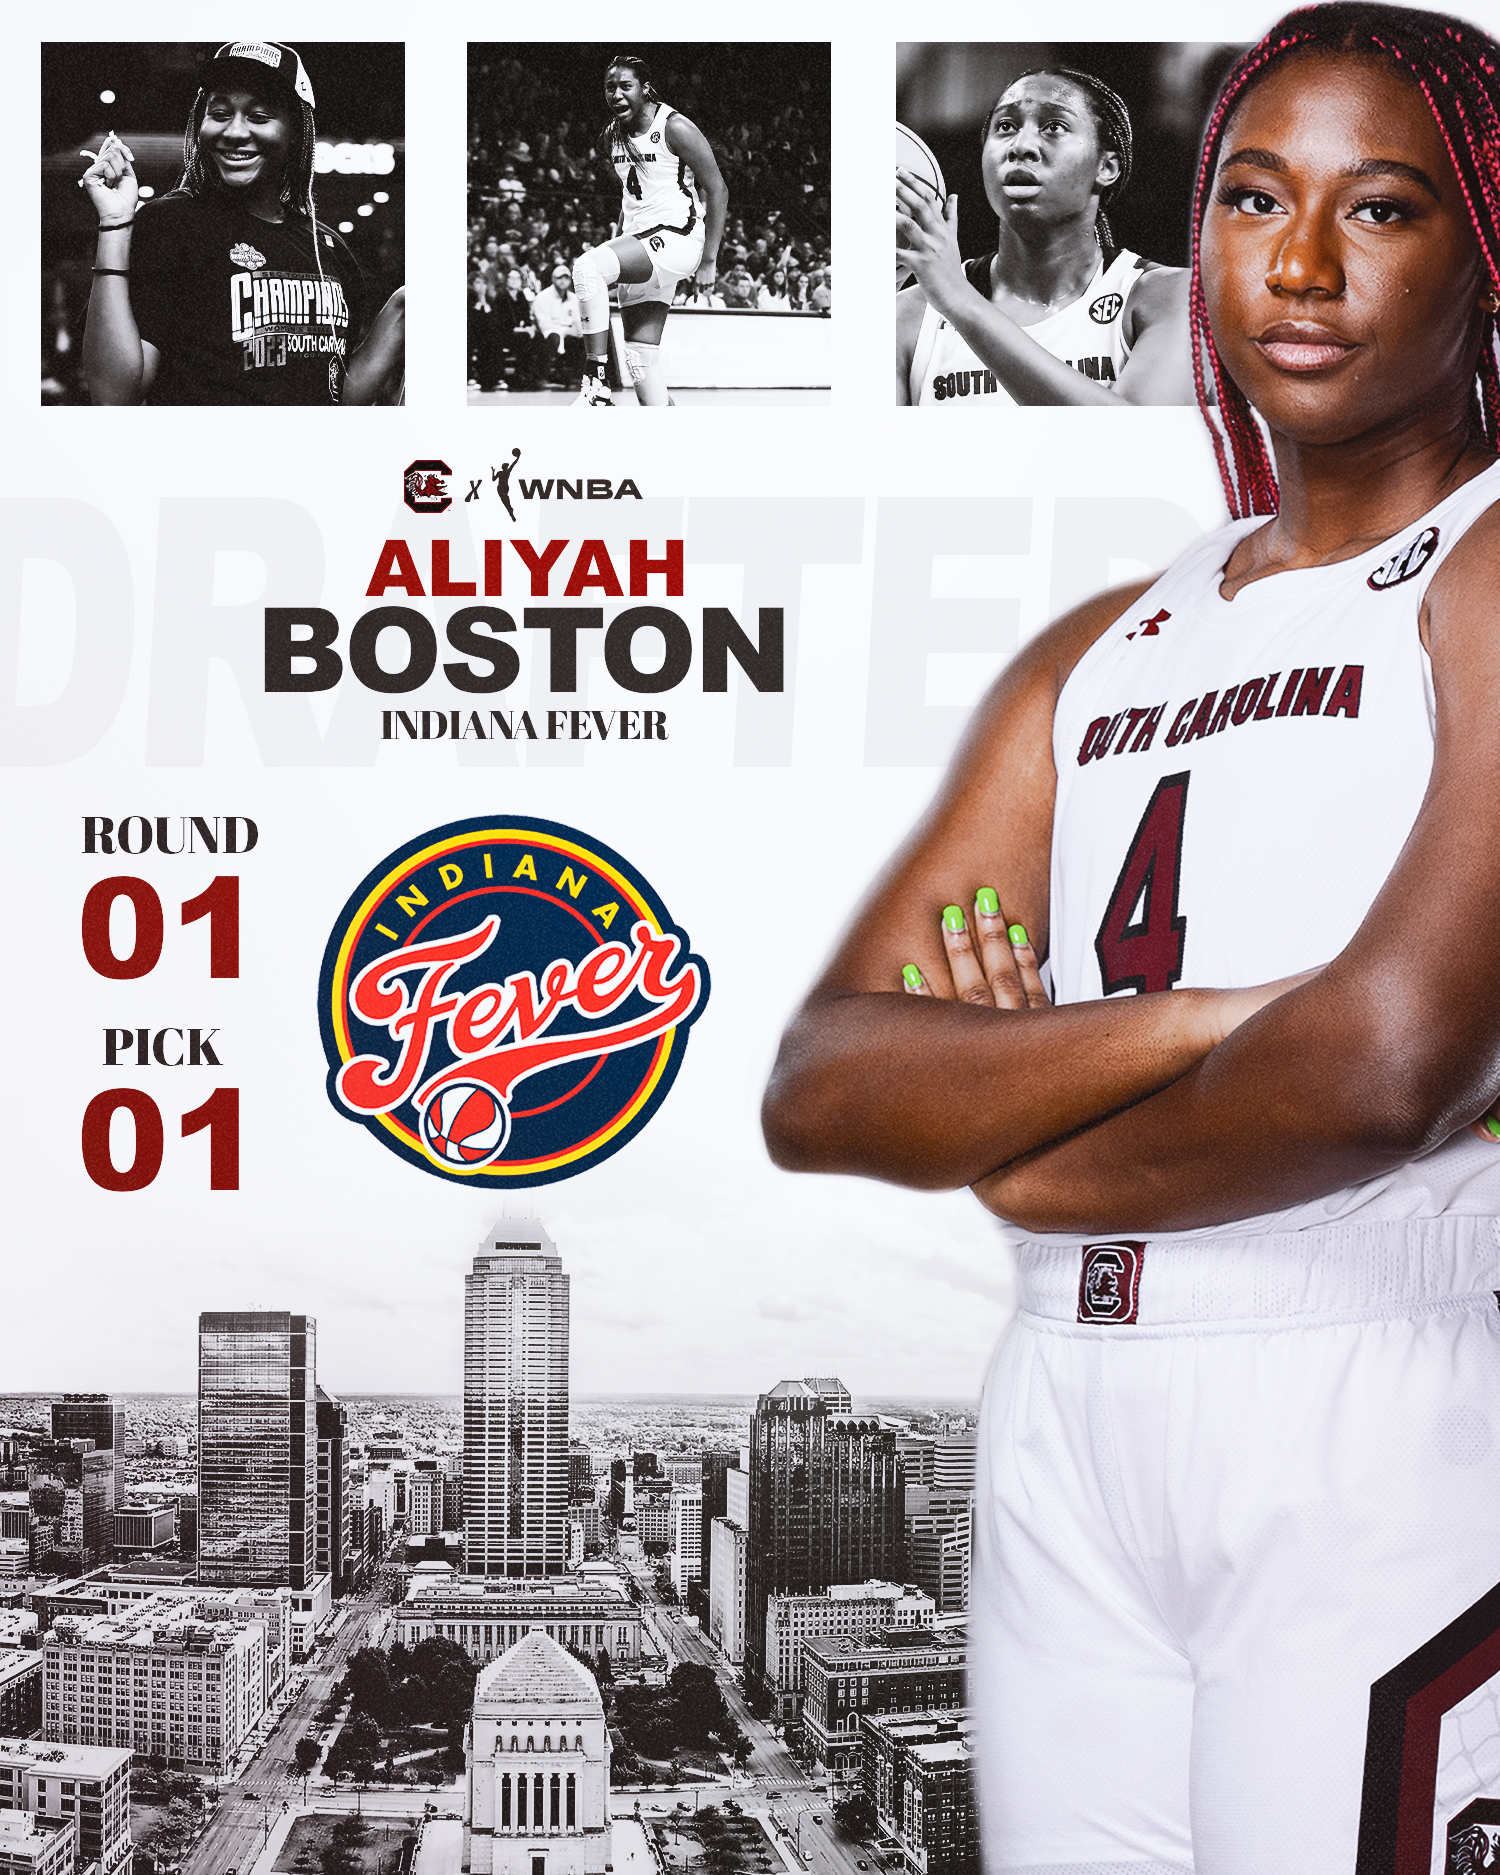 For the 3rd time this season, @aliyah.boston has been named @wnba